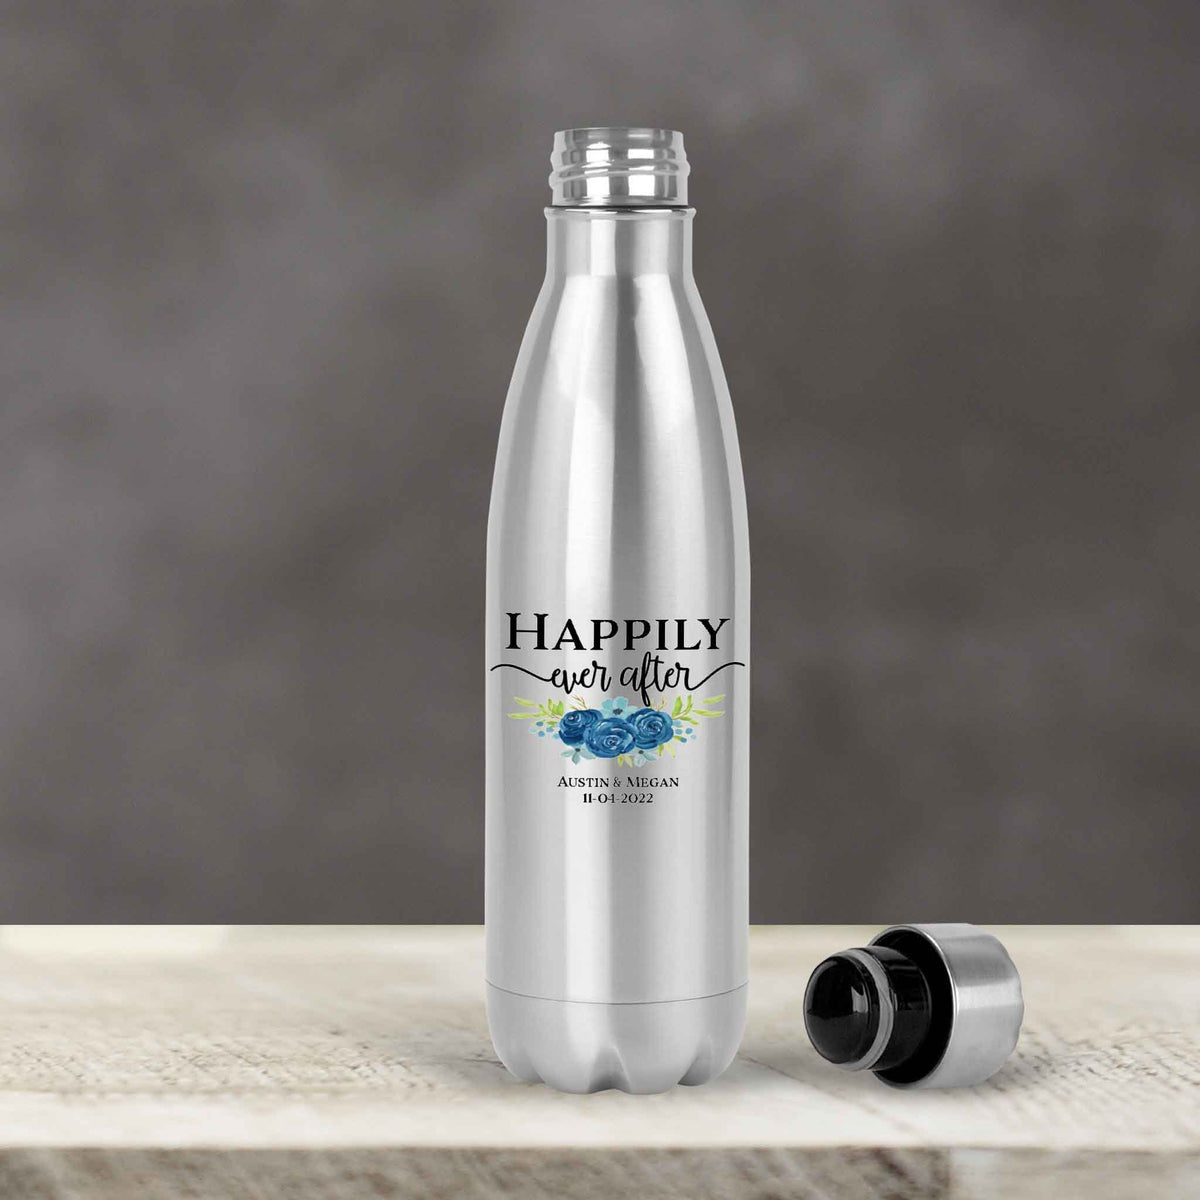 Personalized Water Bottles | Custom Stainless Steel Water Bottles | 17 oz Soda | Happily Ever After Navy Bouqet